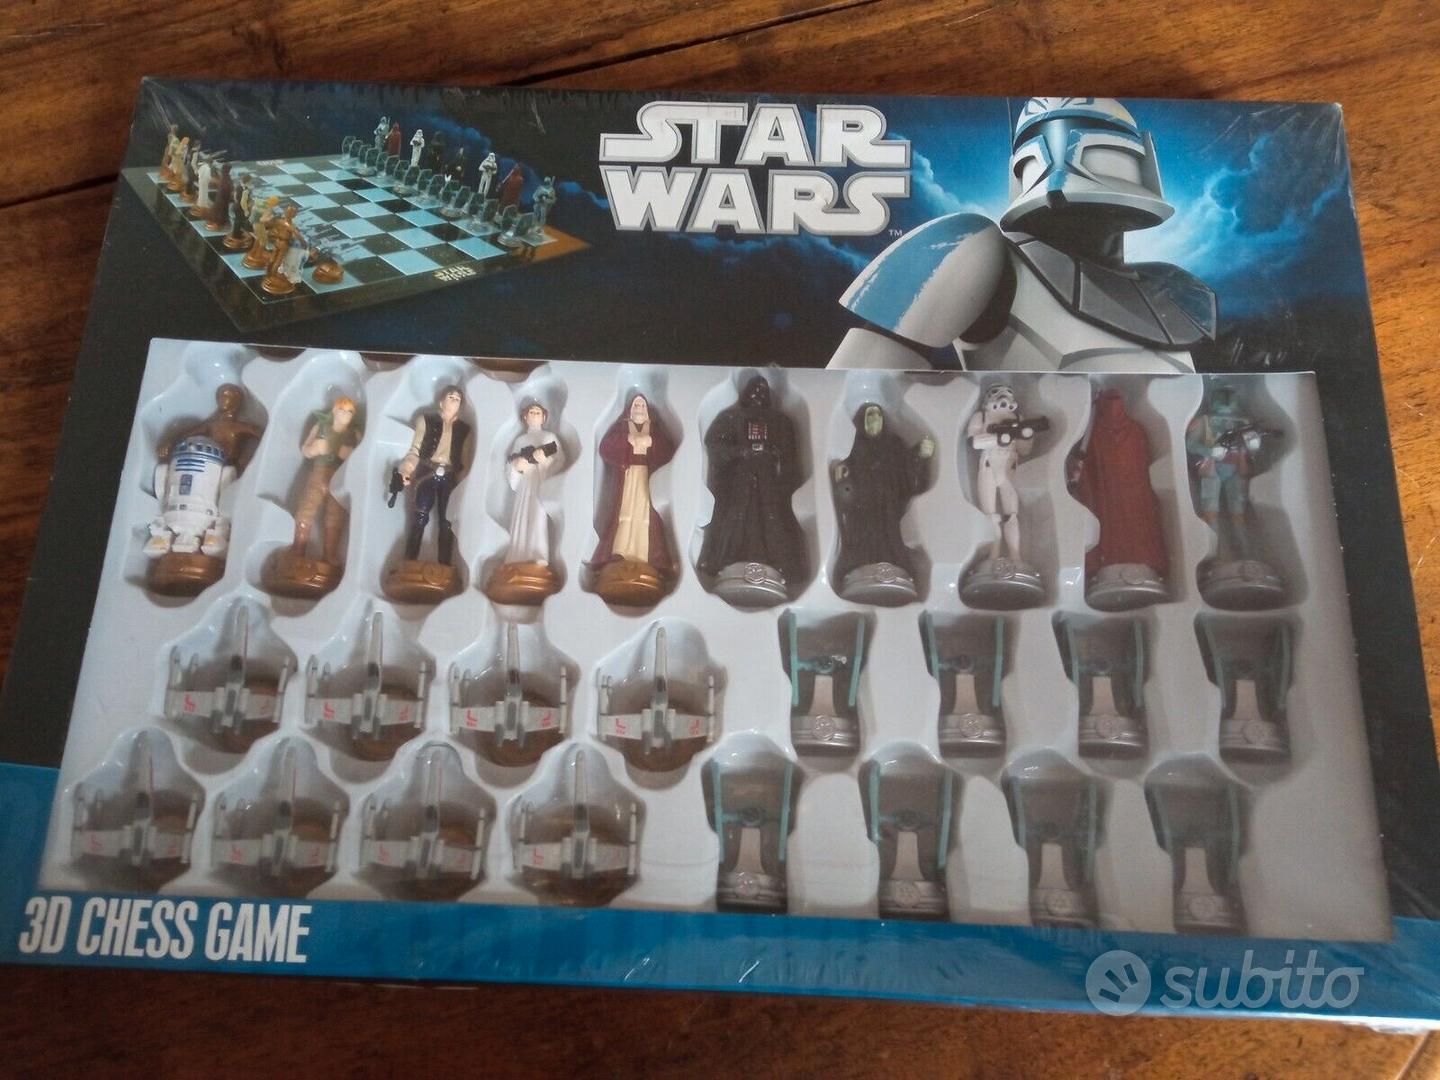 Star Wars 3D Chess Game